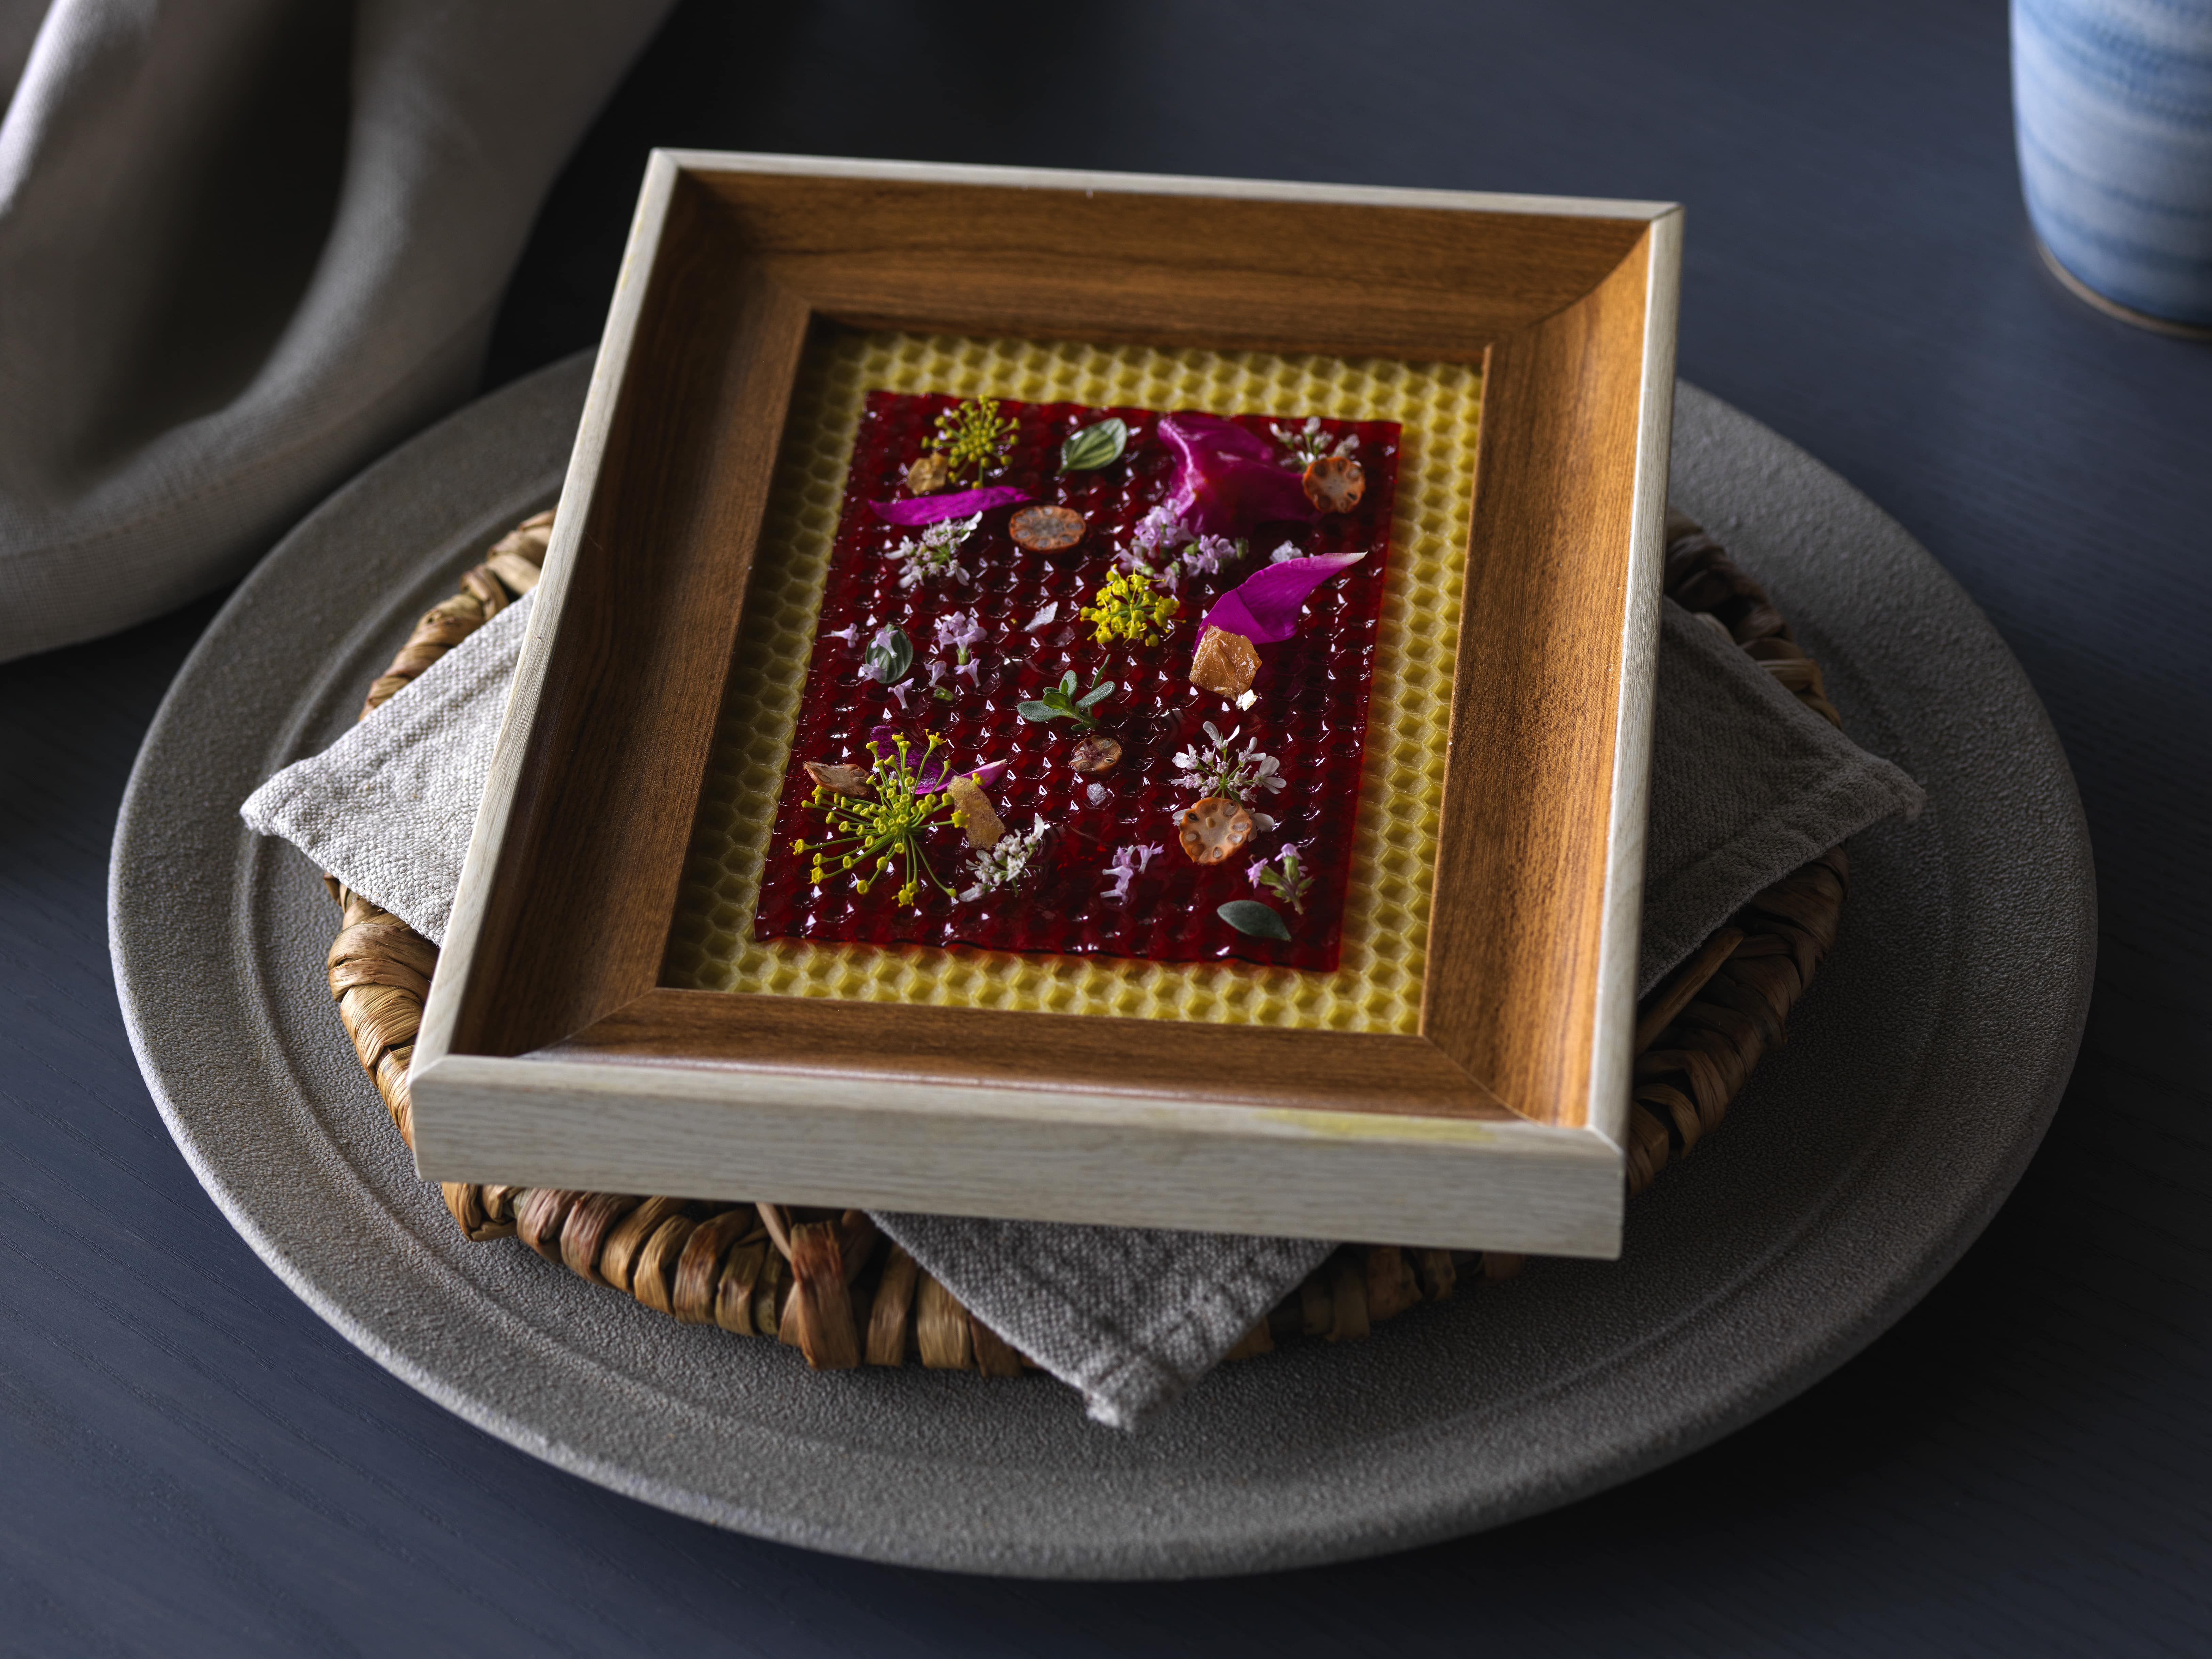 Plum leather with fresh aromatic flowers